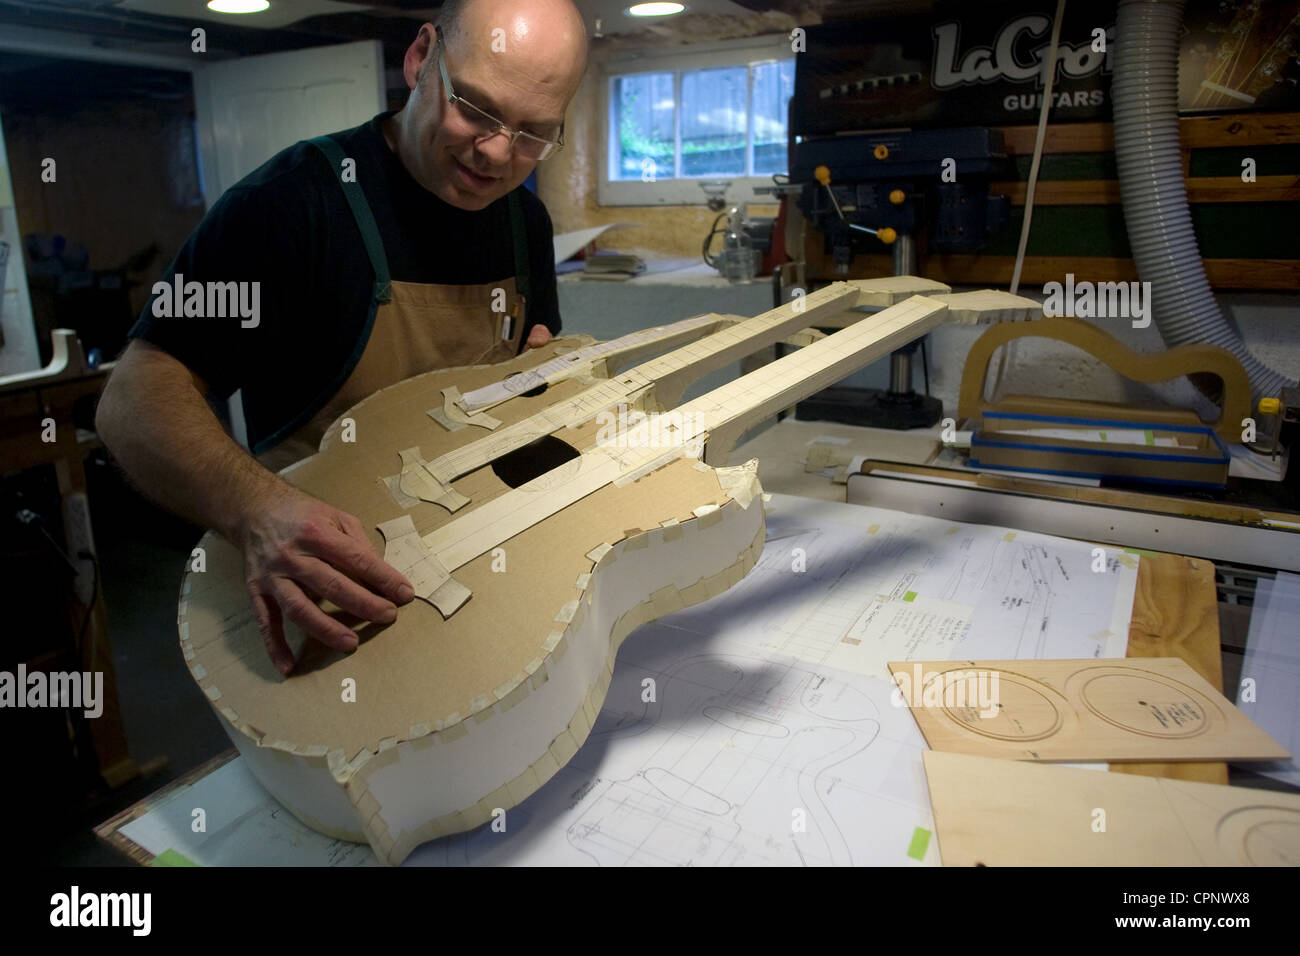 St. Thomas Ontario, Canada. John LaCroix of Lacroix Guitars custom builds guitars that sell between $3000 to $10,000. Stock Photo